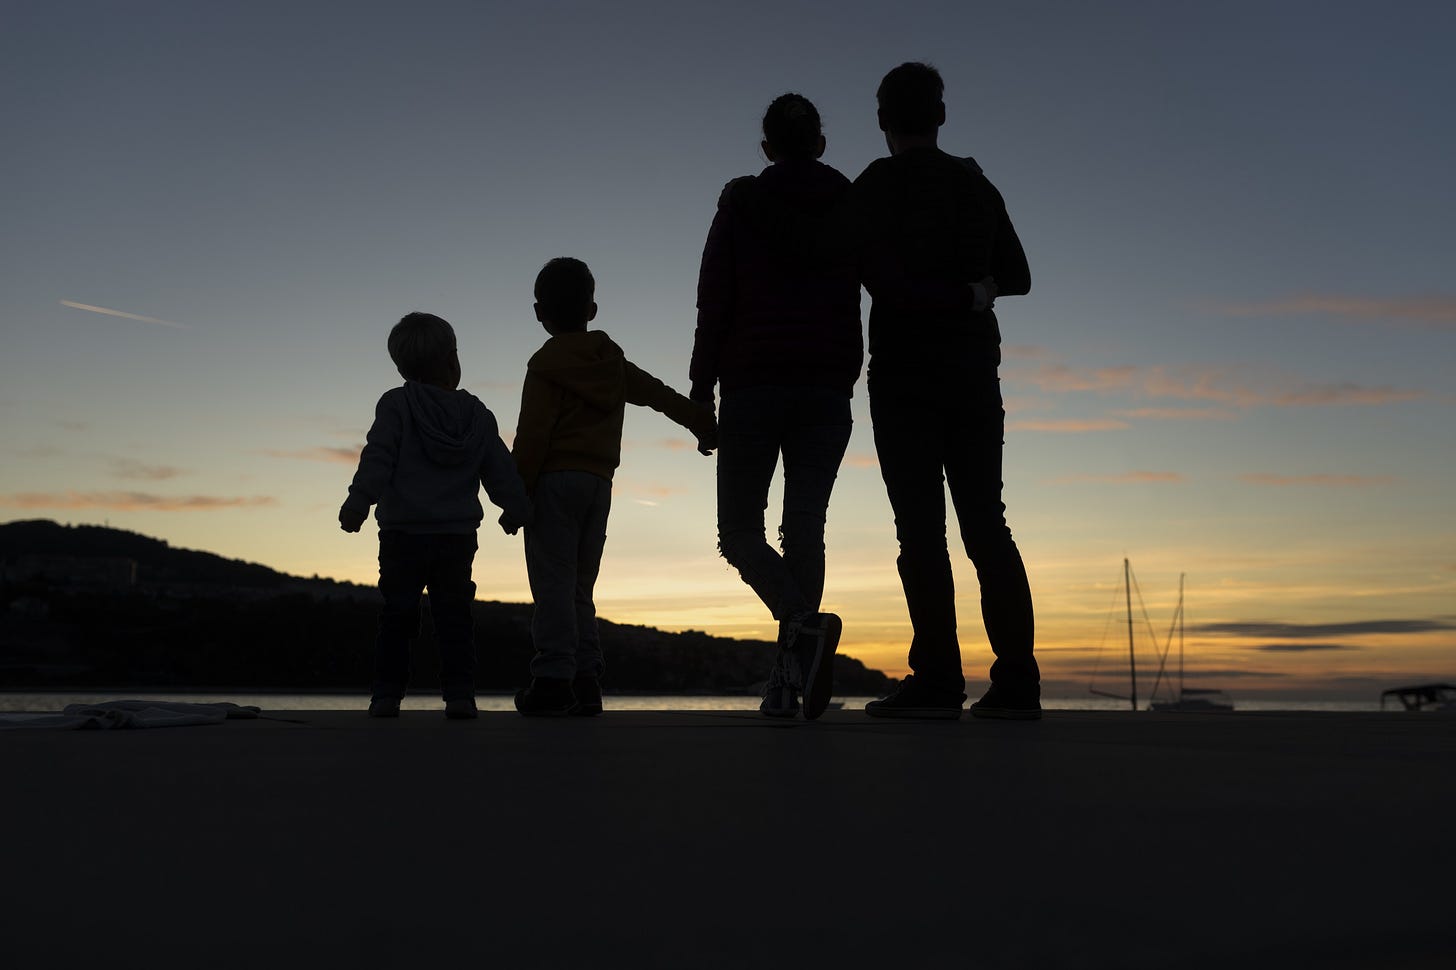 The silhoutte of a family holding hands at sunset.